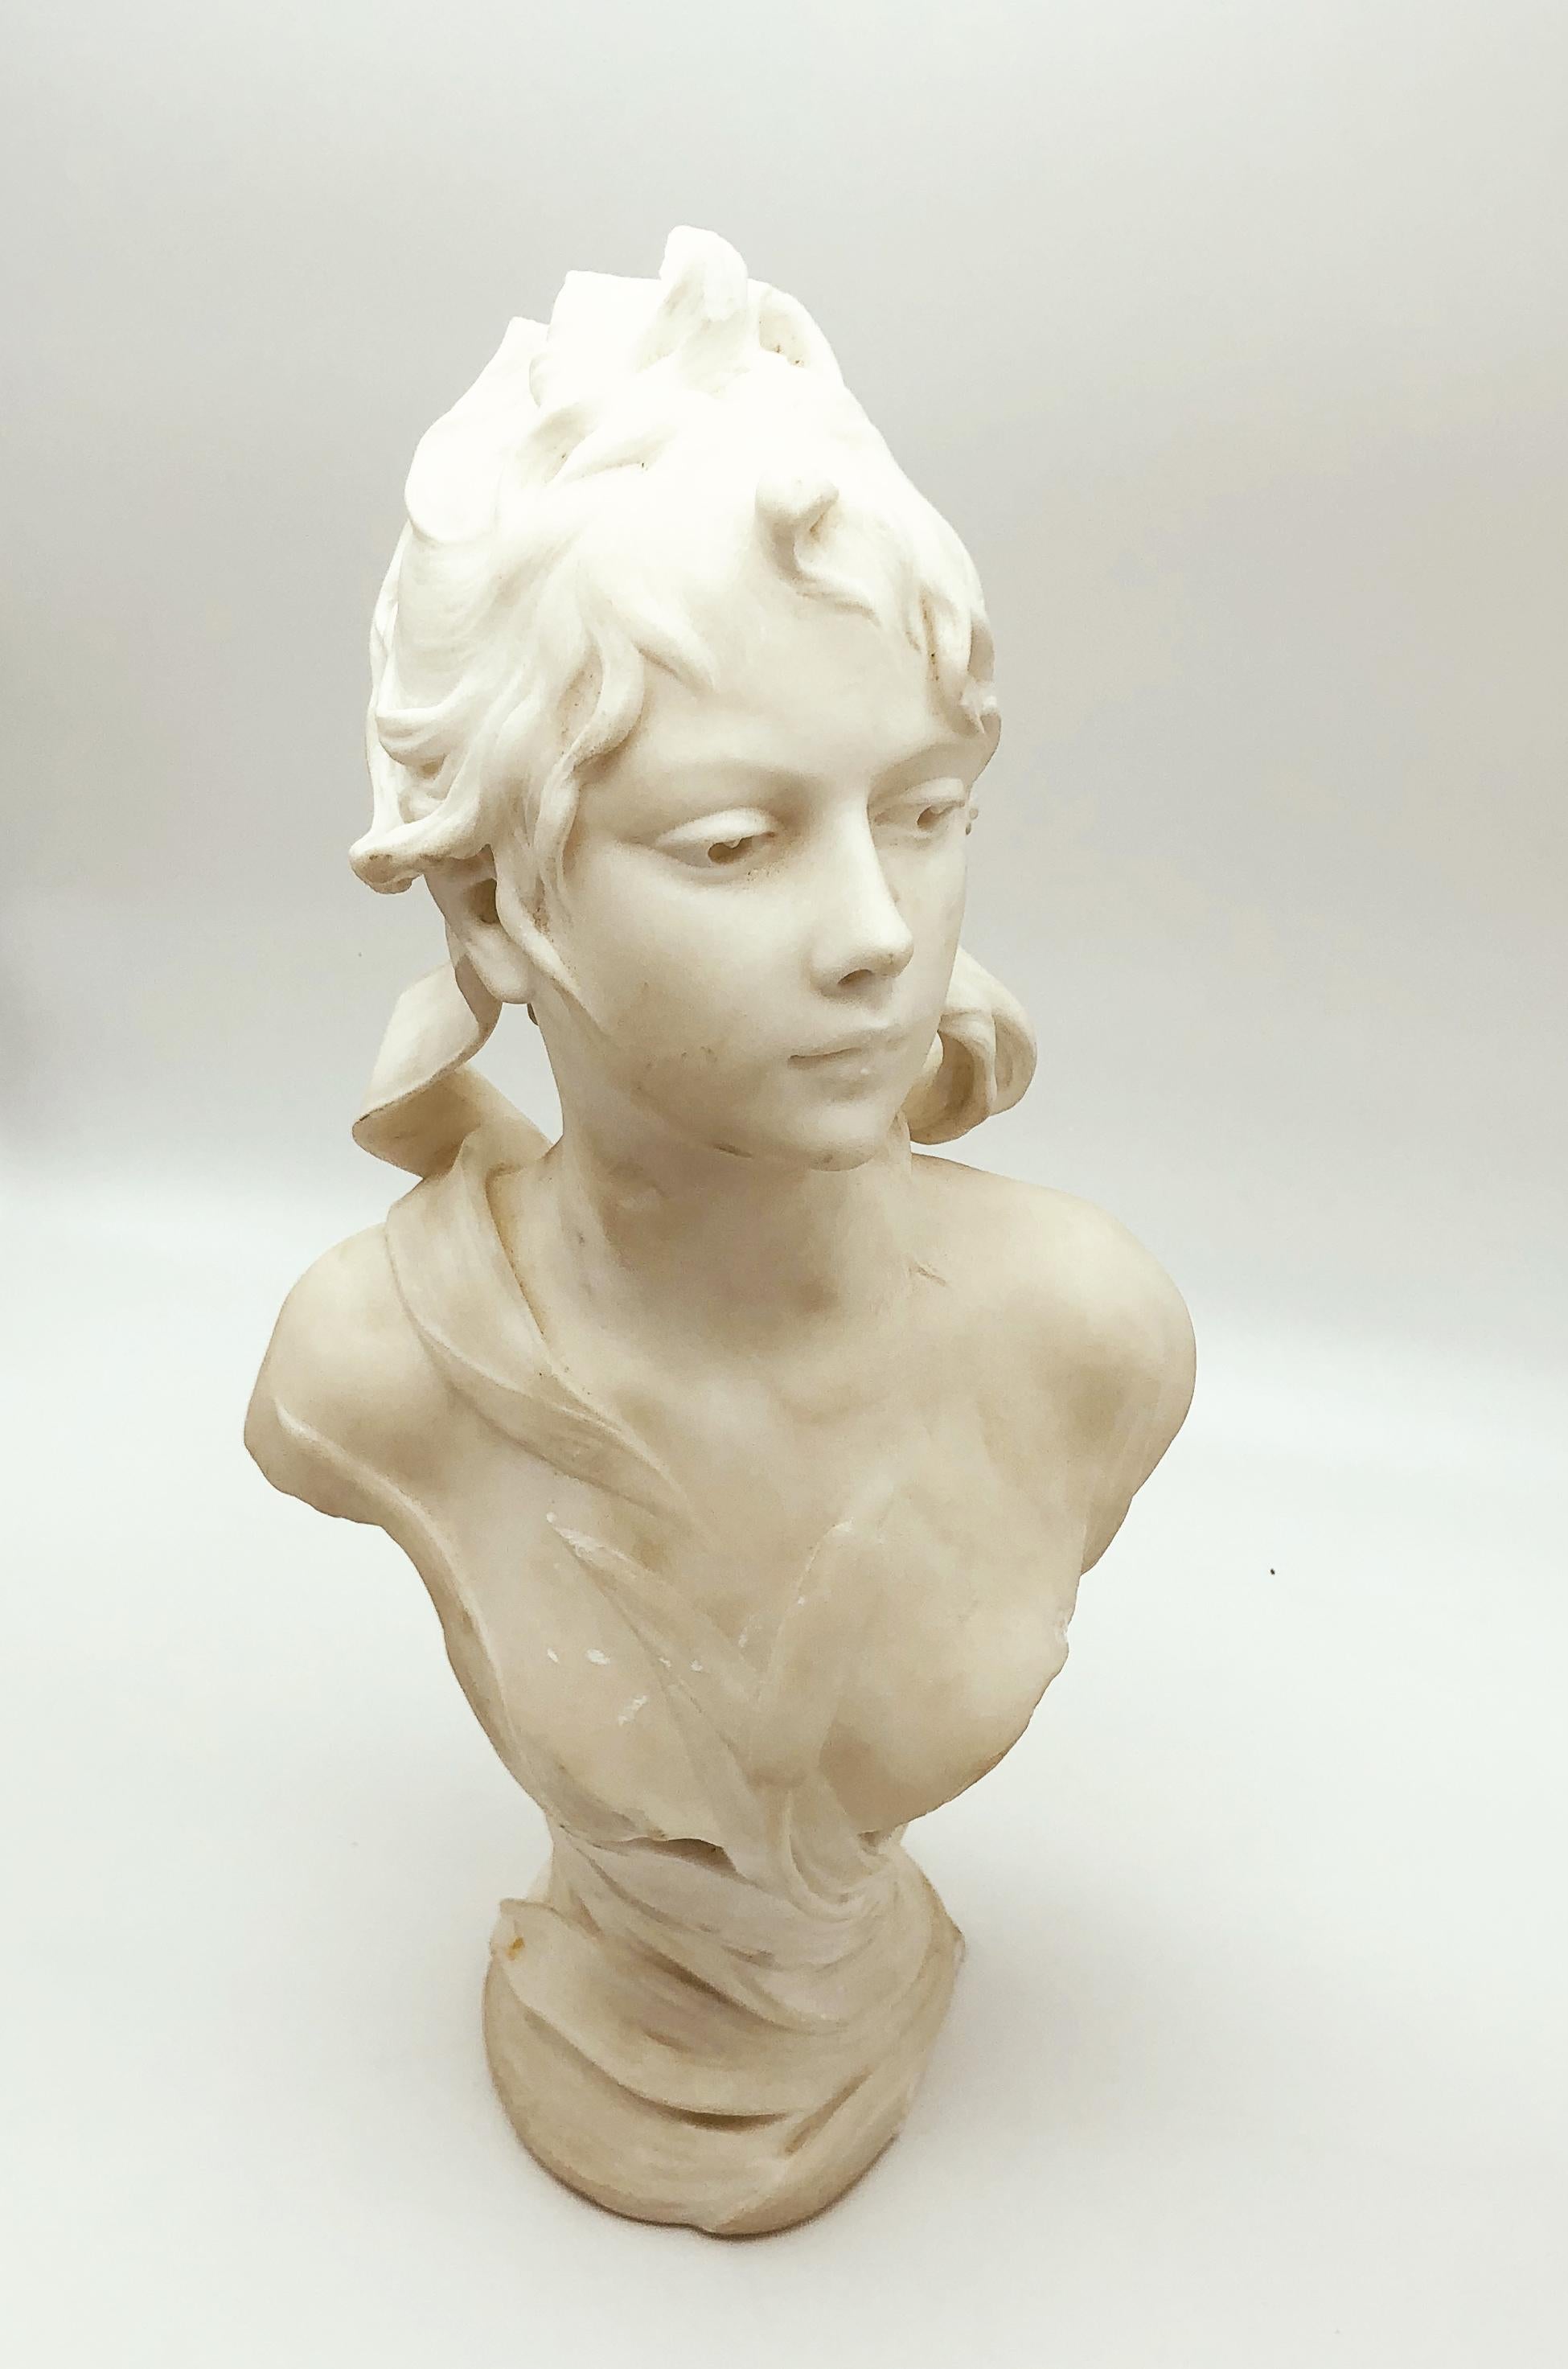 A very beautiful and rare sculpture in white marble, by the sculptor Antoine Jospeh Nelson, an important art nouveau sculptor active in France, Belgium and in Holland. The portrait of this young woman is a classical example of his art and represent